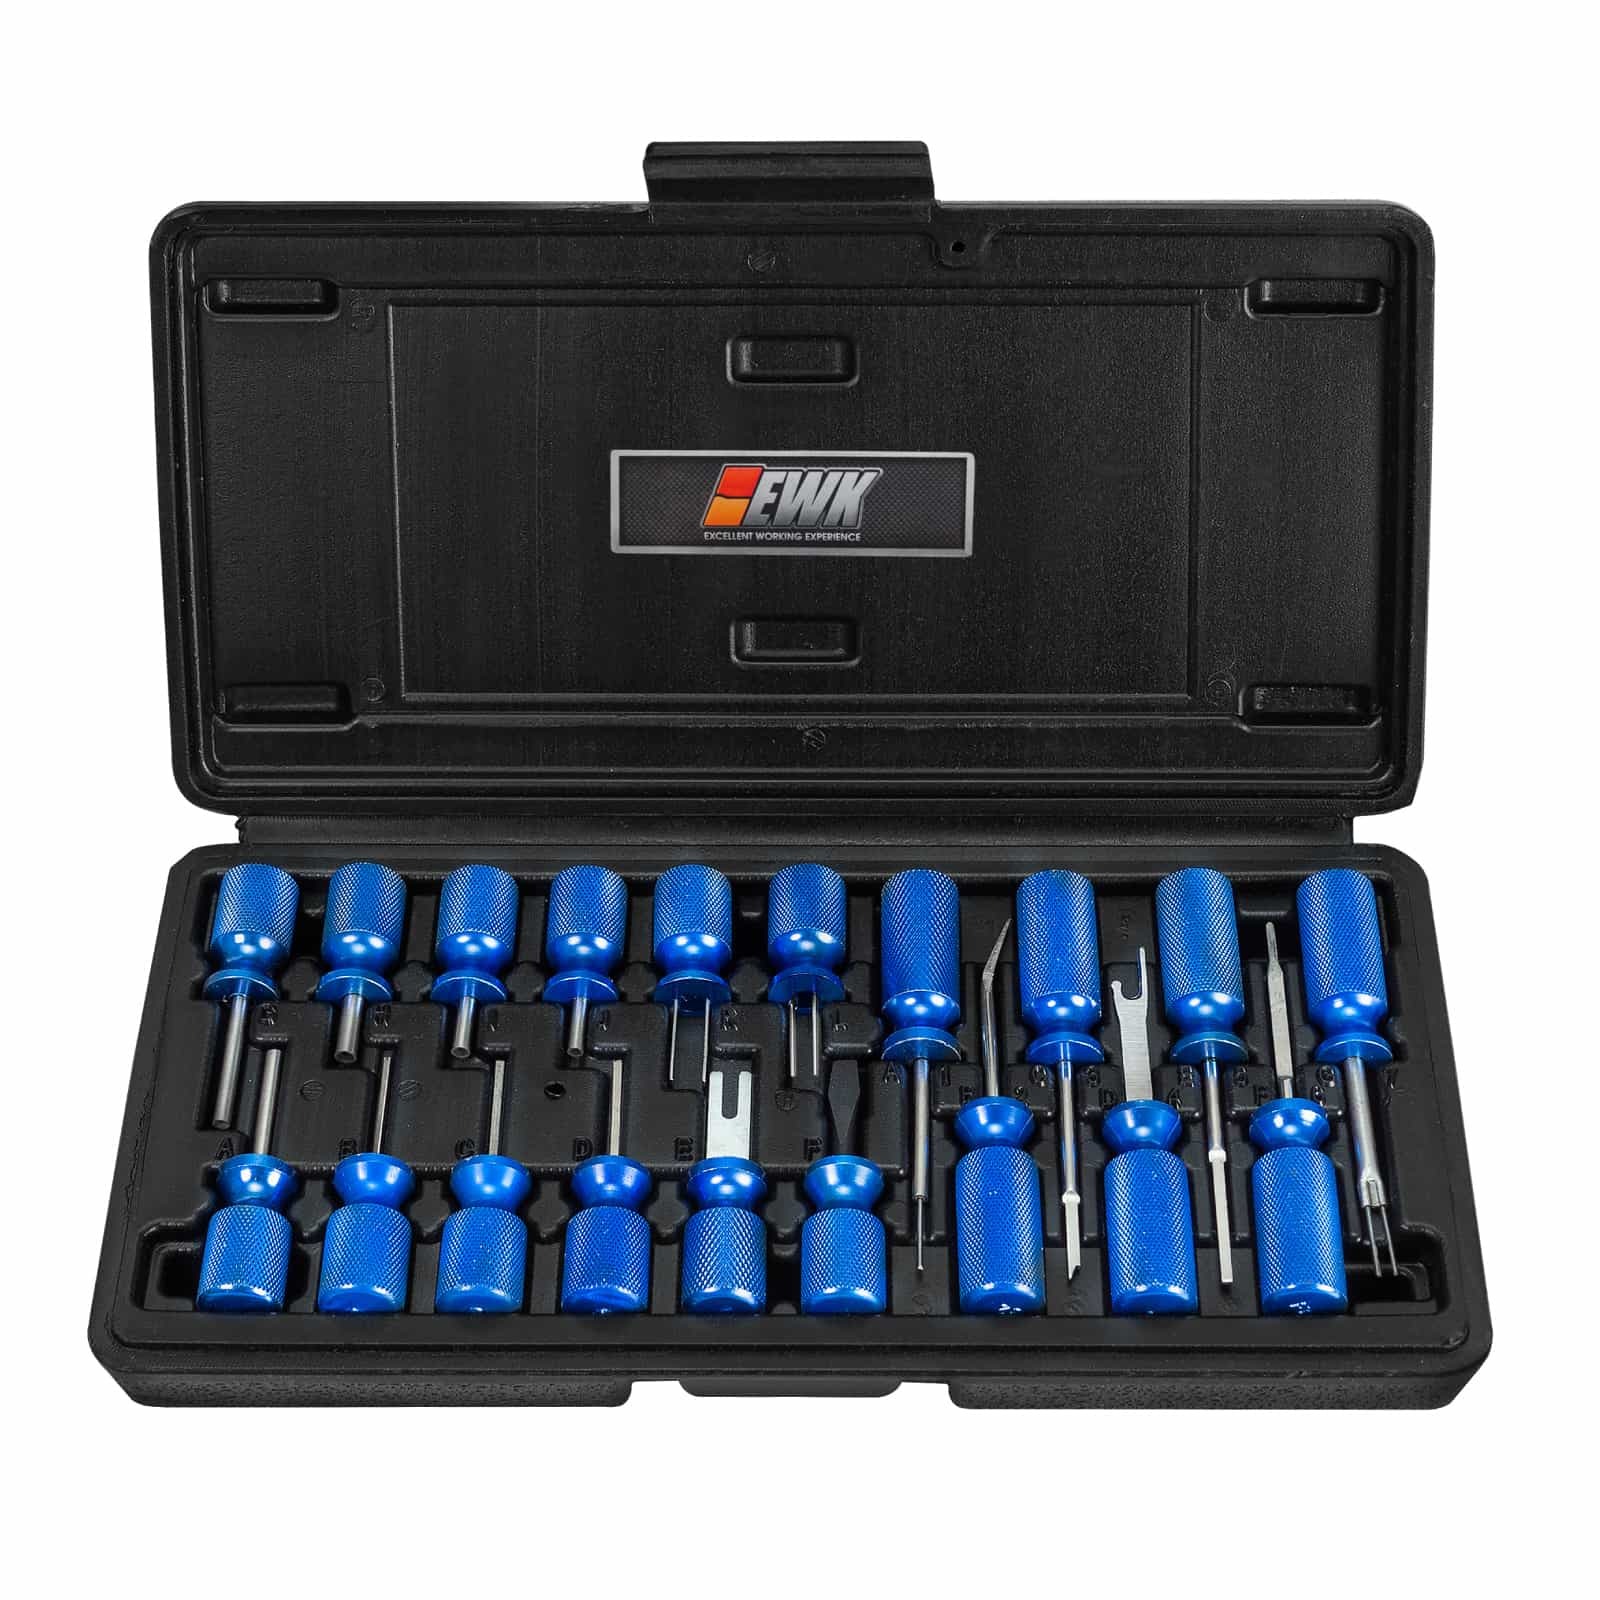 Maerd Terminal Release Tool Set, 23pcs Universal Terminal Removal Tool kit,  Vehicles Terminal Block Depinning Tool & Household Devices Electrical Wire